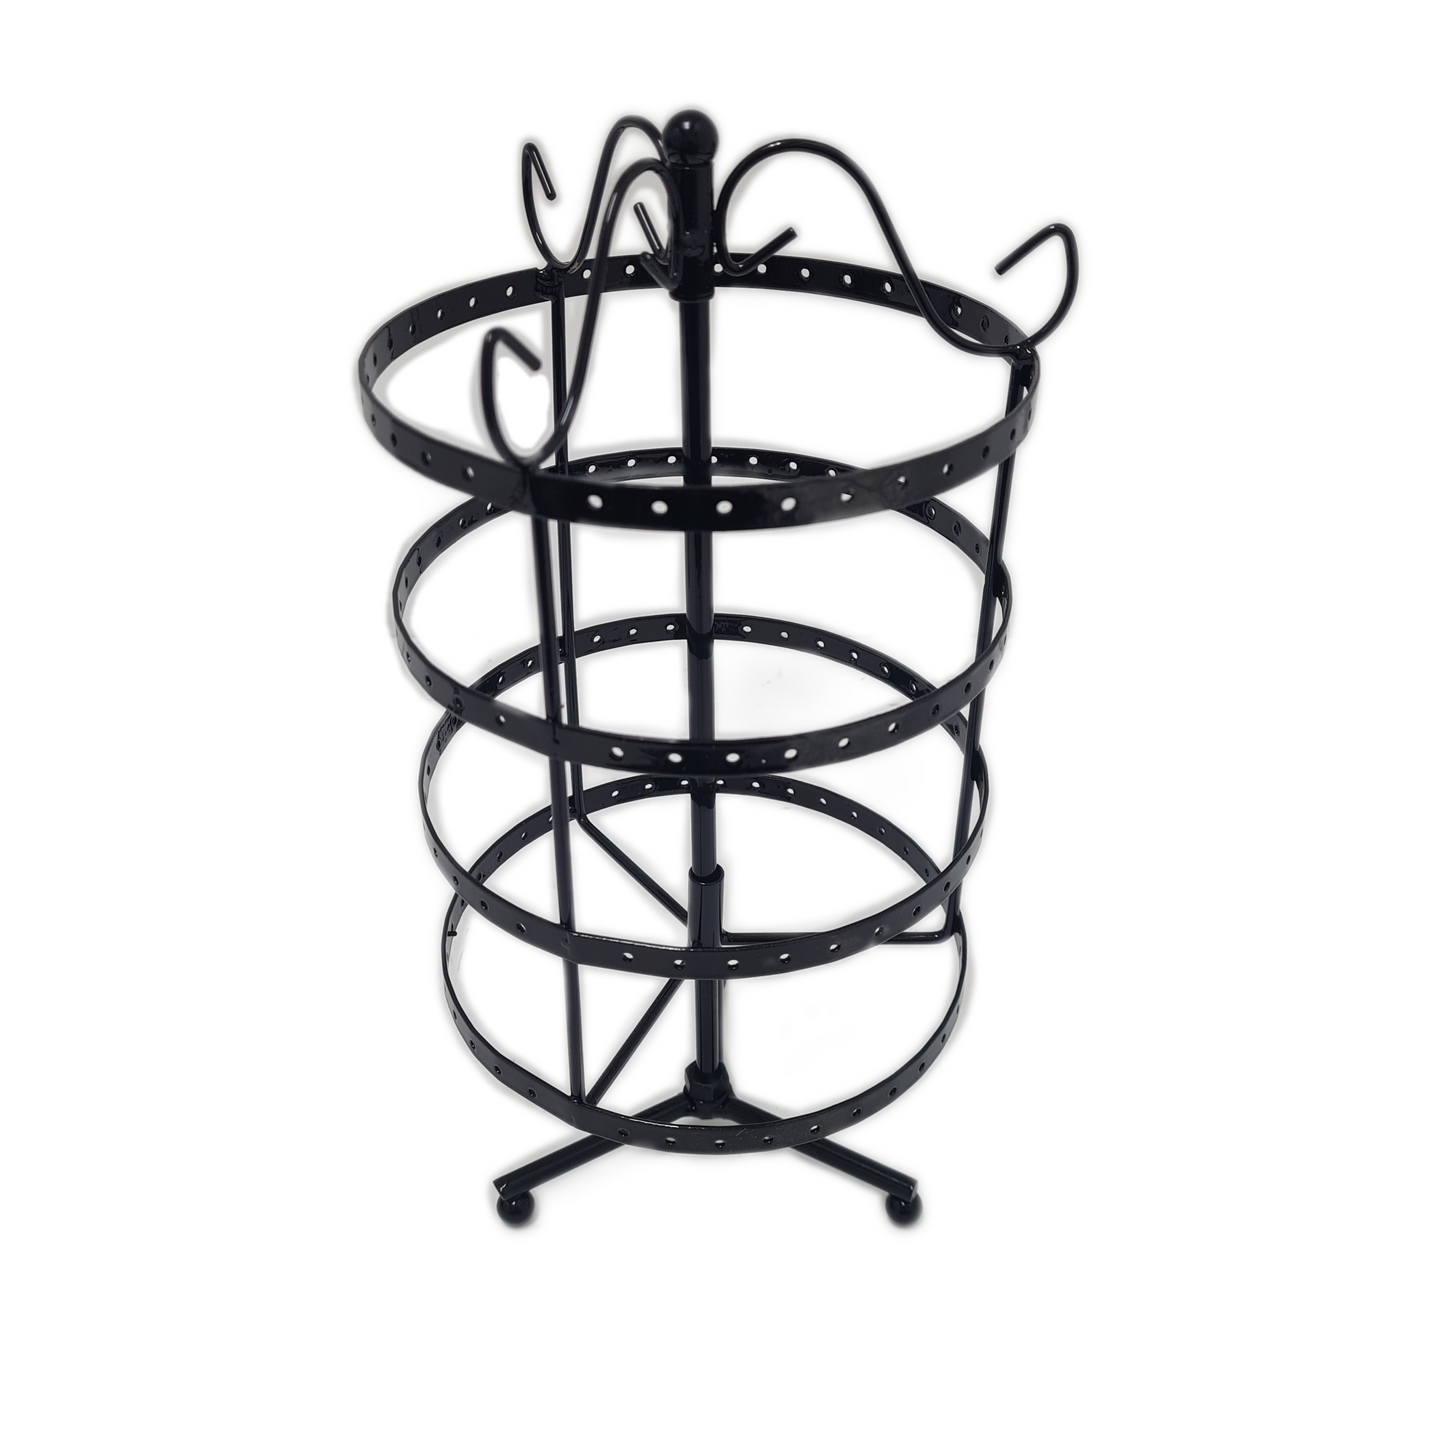 4 Tier Black Rotating Earring Display Stand